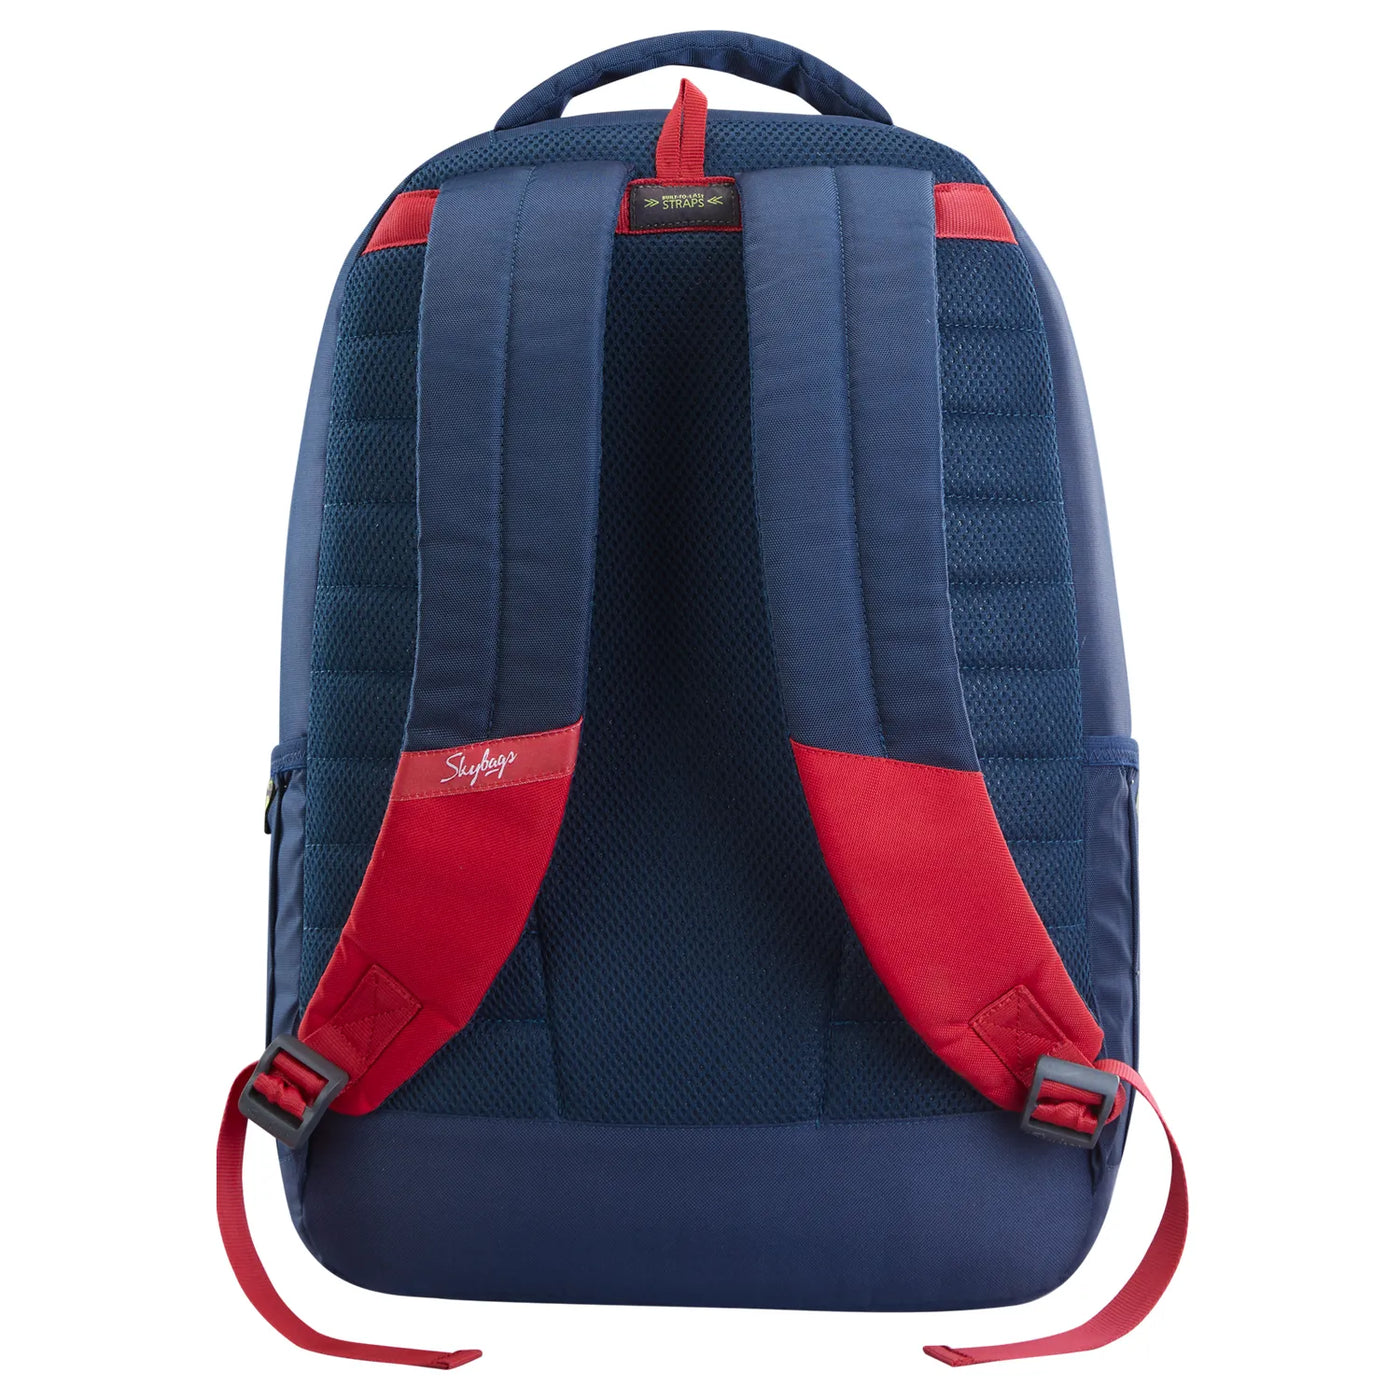 SKYBAGS BFF "1 BACKPACK BLUE"